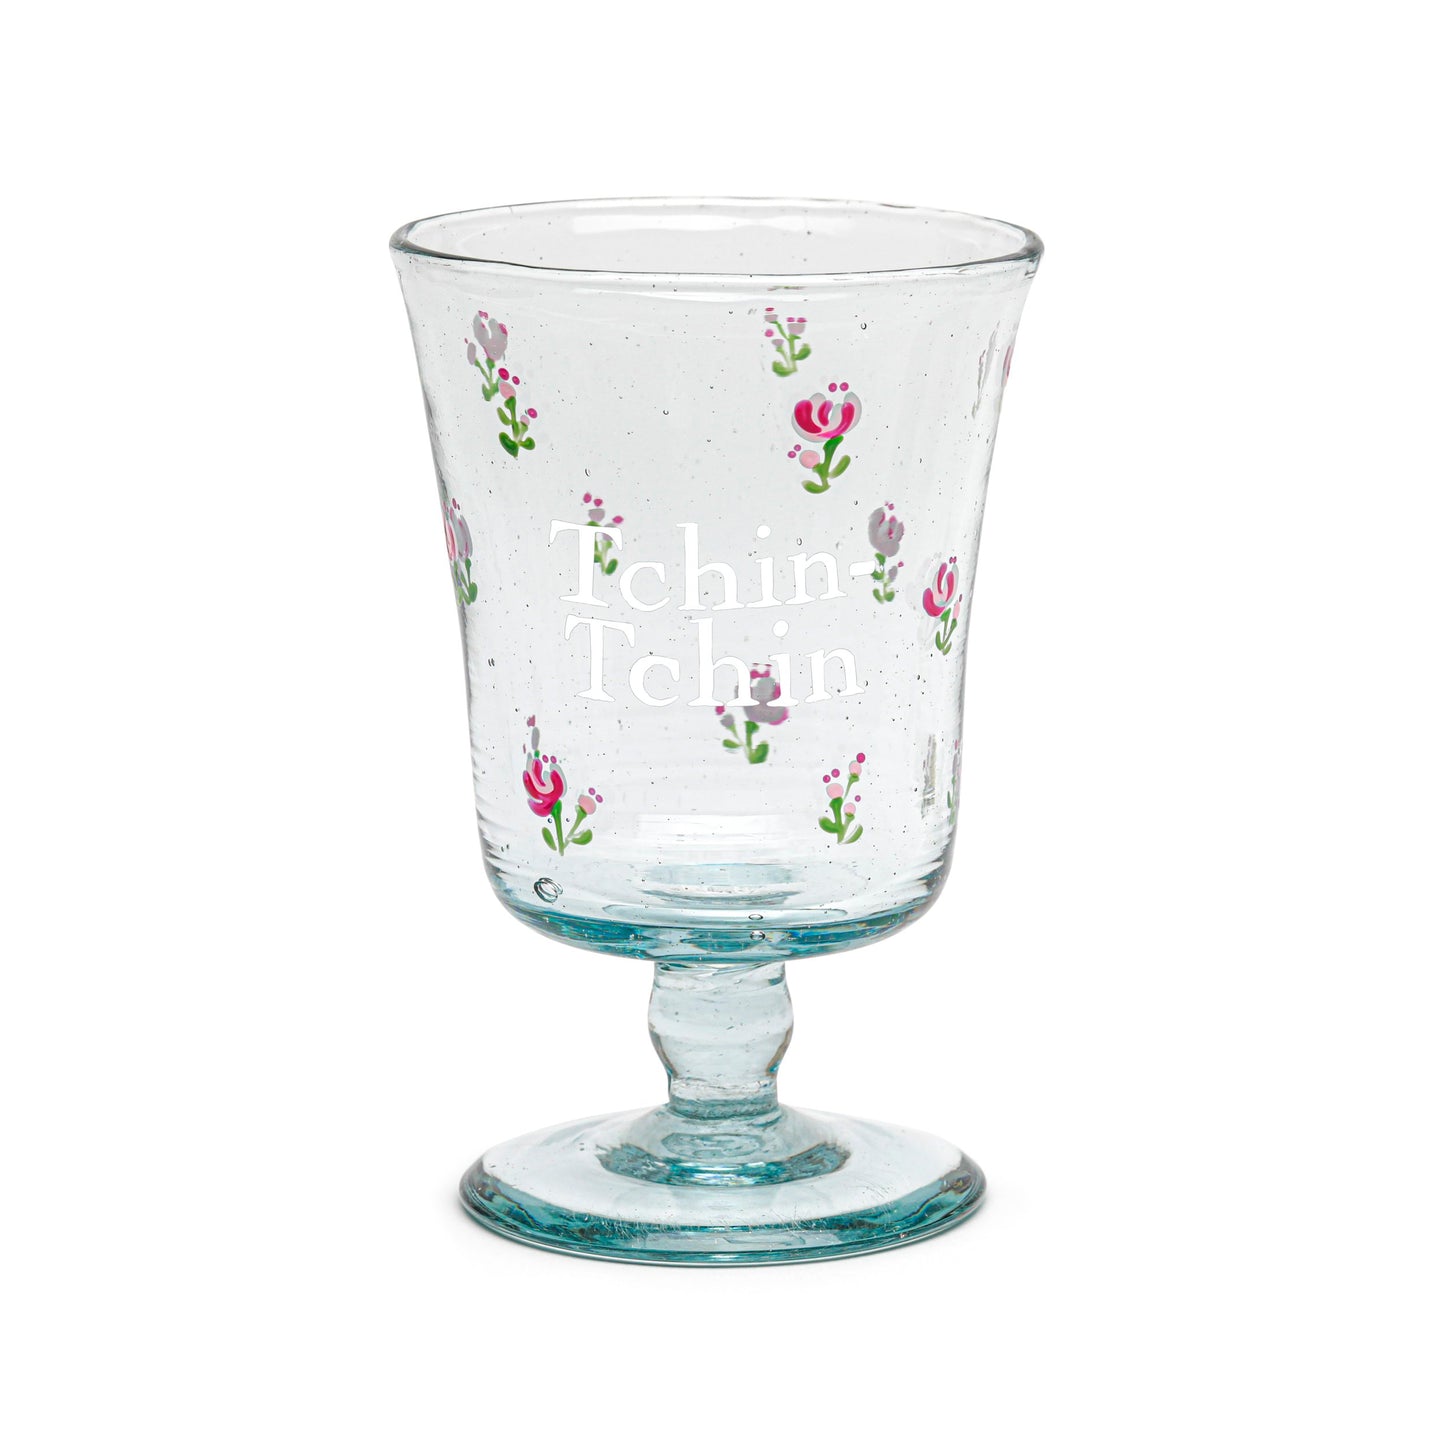 Hand Painted Wine Glass | ALL IN ROSES: TCHIN-TCHIN